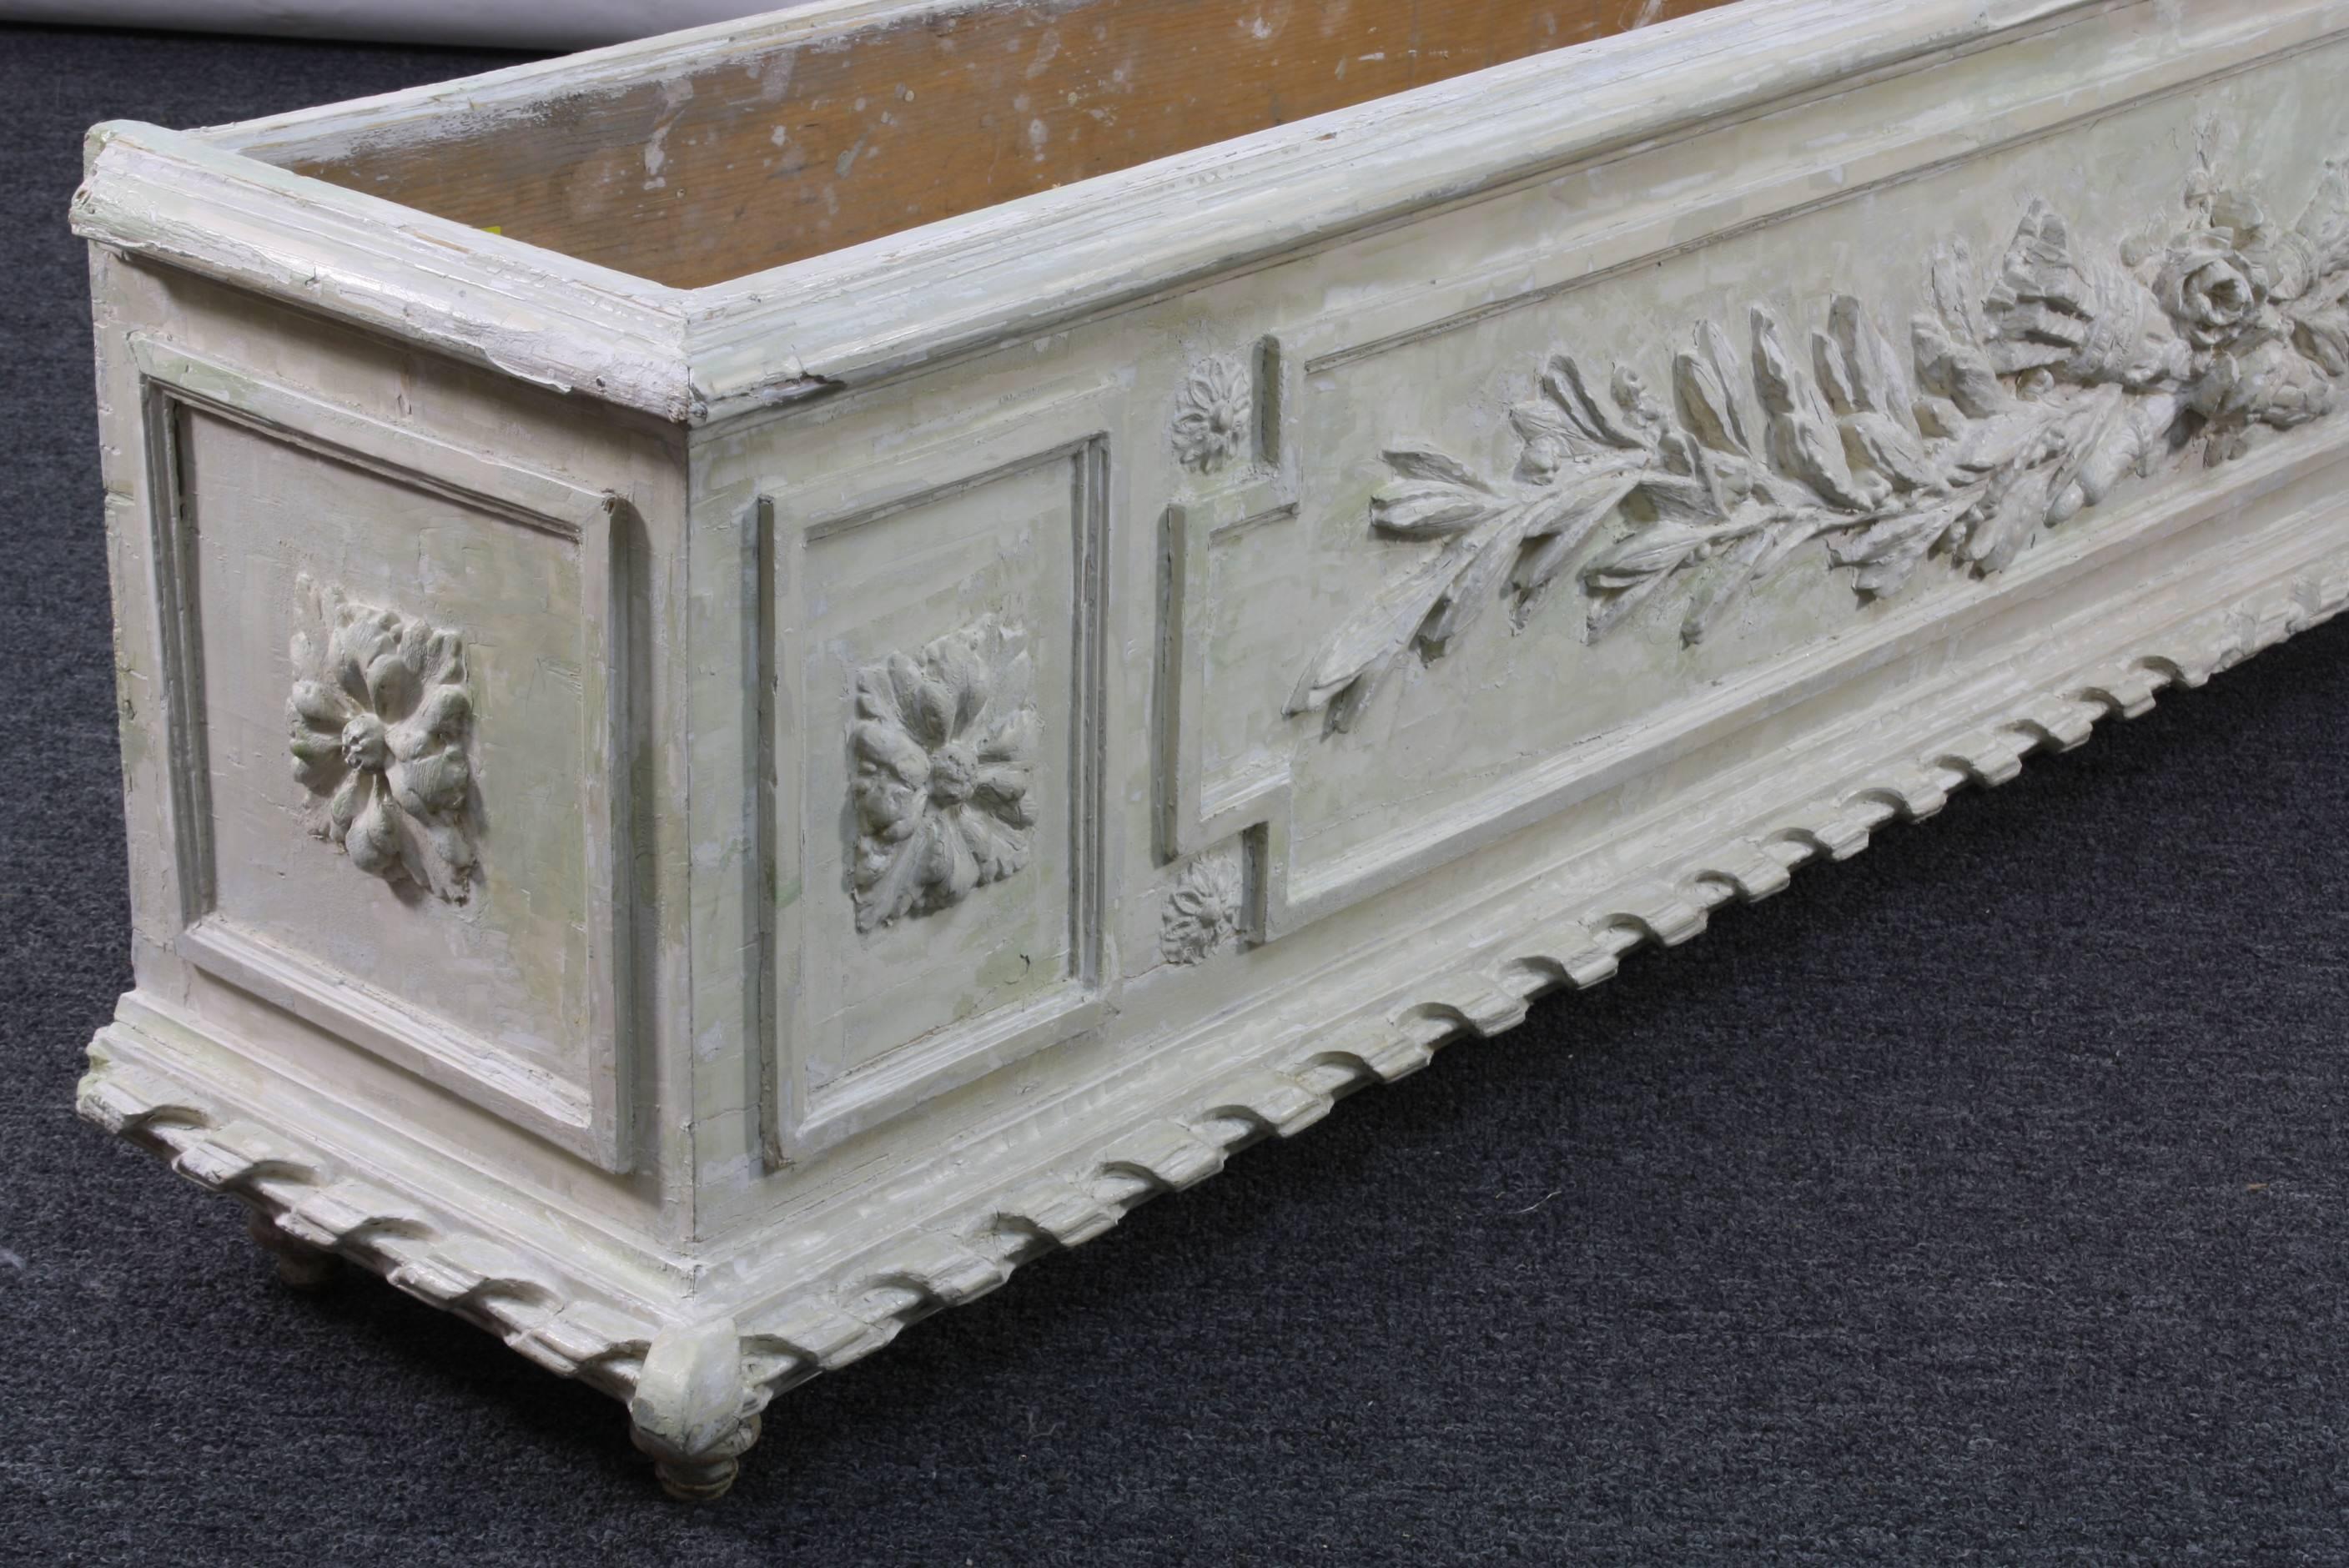 Large Painted and Carved Wood Neoclassical Planter In Good Condition For Sale In Pembroke, MA